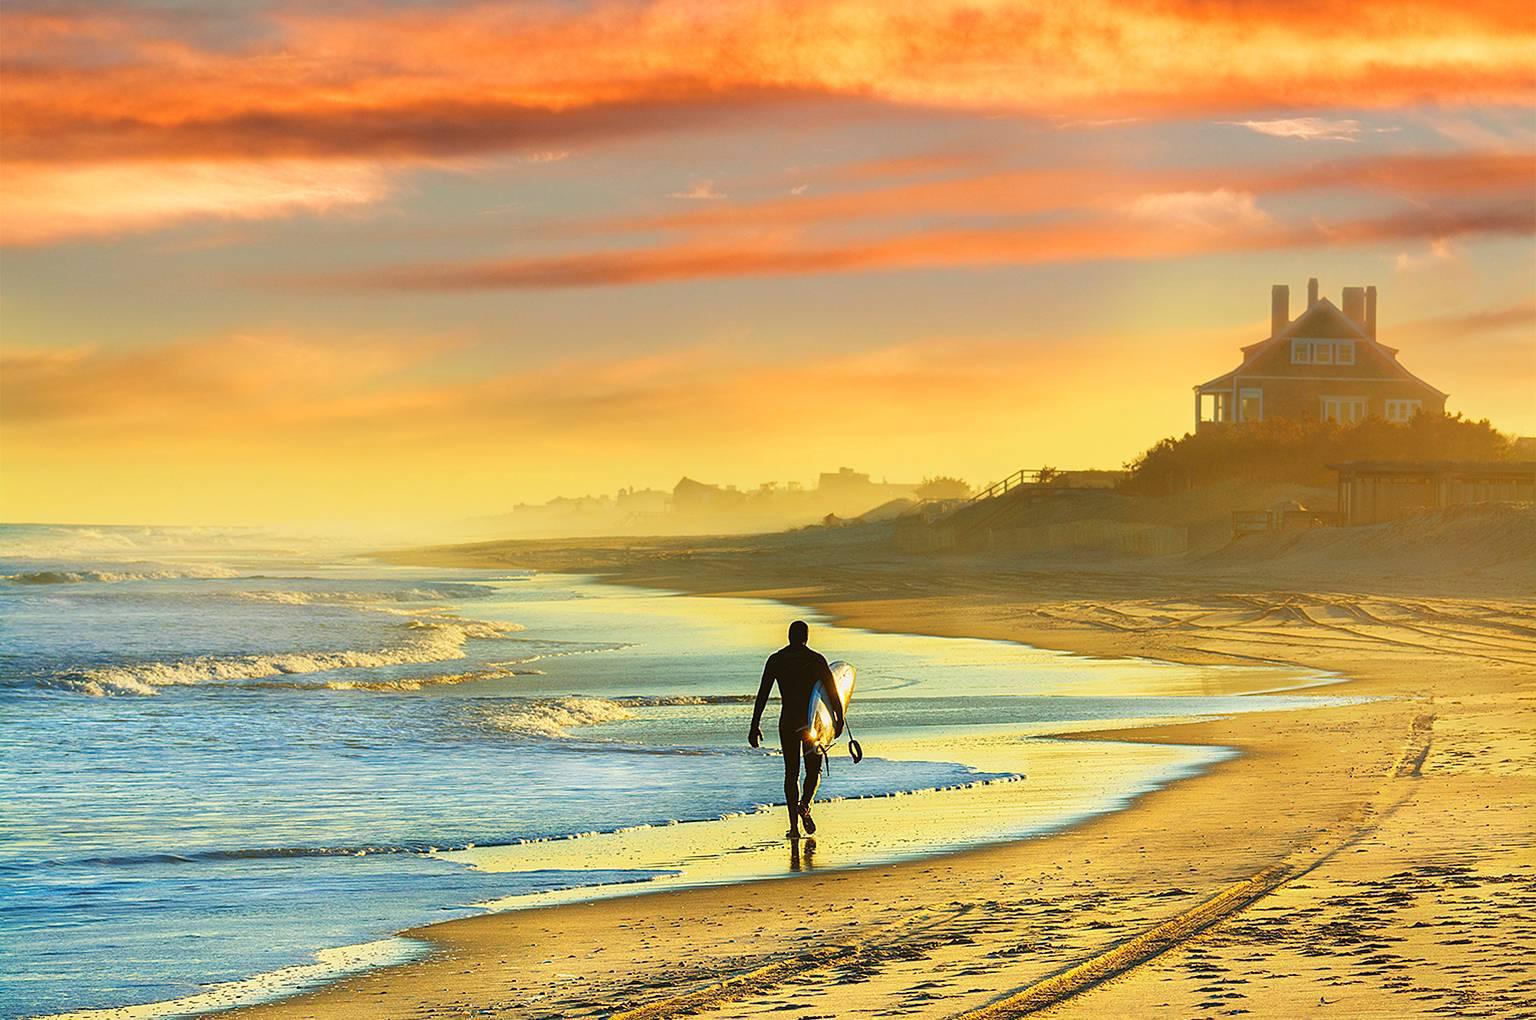 Mitchell Funk Landscape Photograph - Surfer, East Hampton Beach with Dramatic Sunset and Golden Light